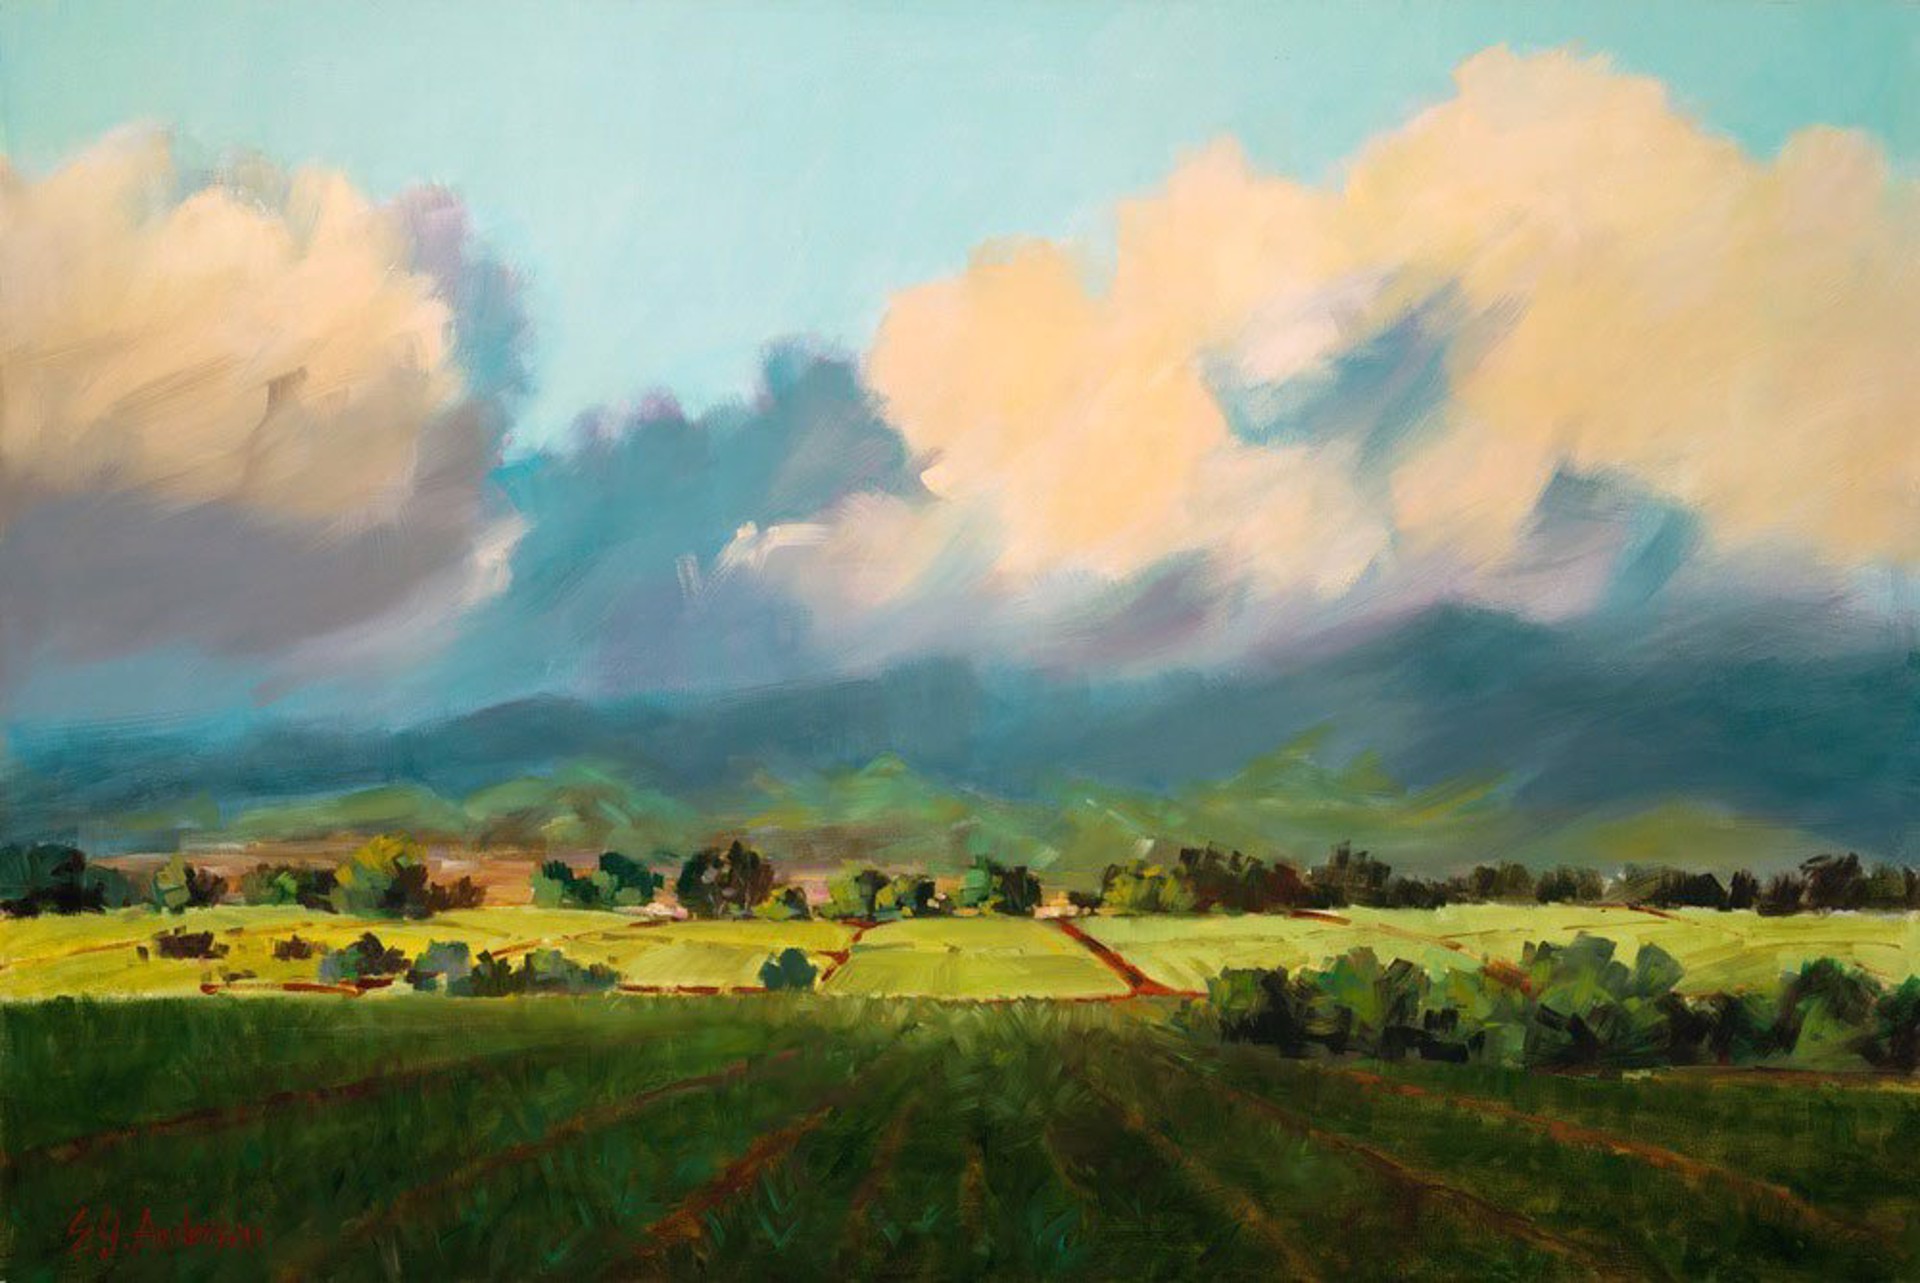 Fields in a Setting Sun by Susie Y. Anderson